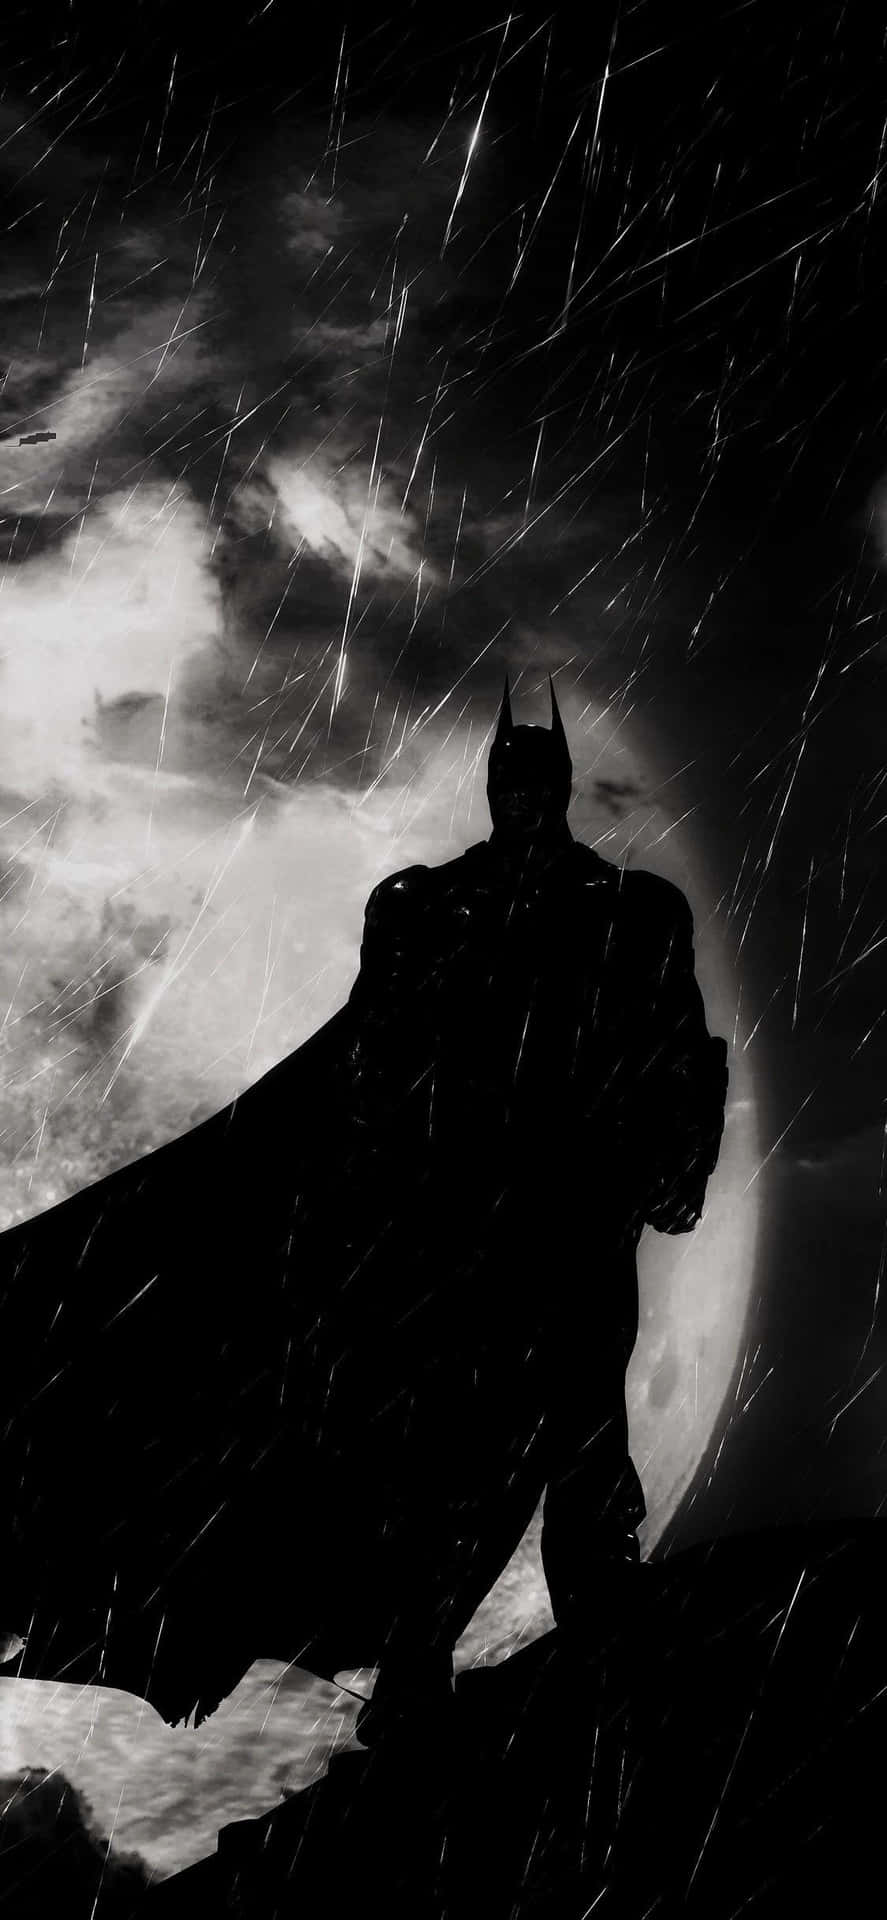 Get your hands on this stunning Batman wallpaper for your iPhone Wallpaper